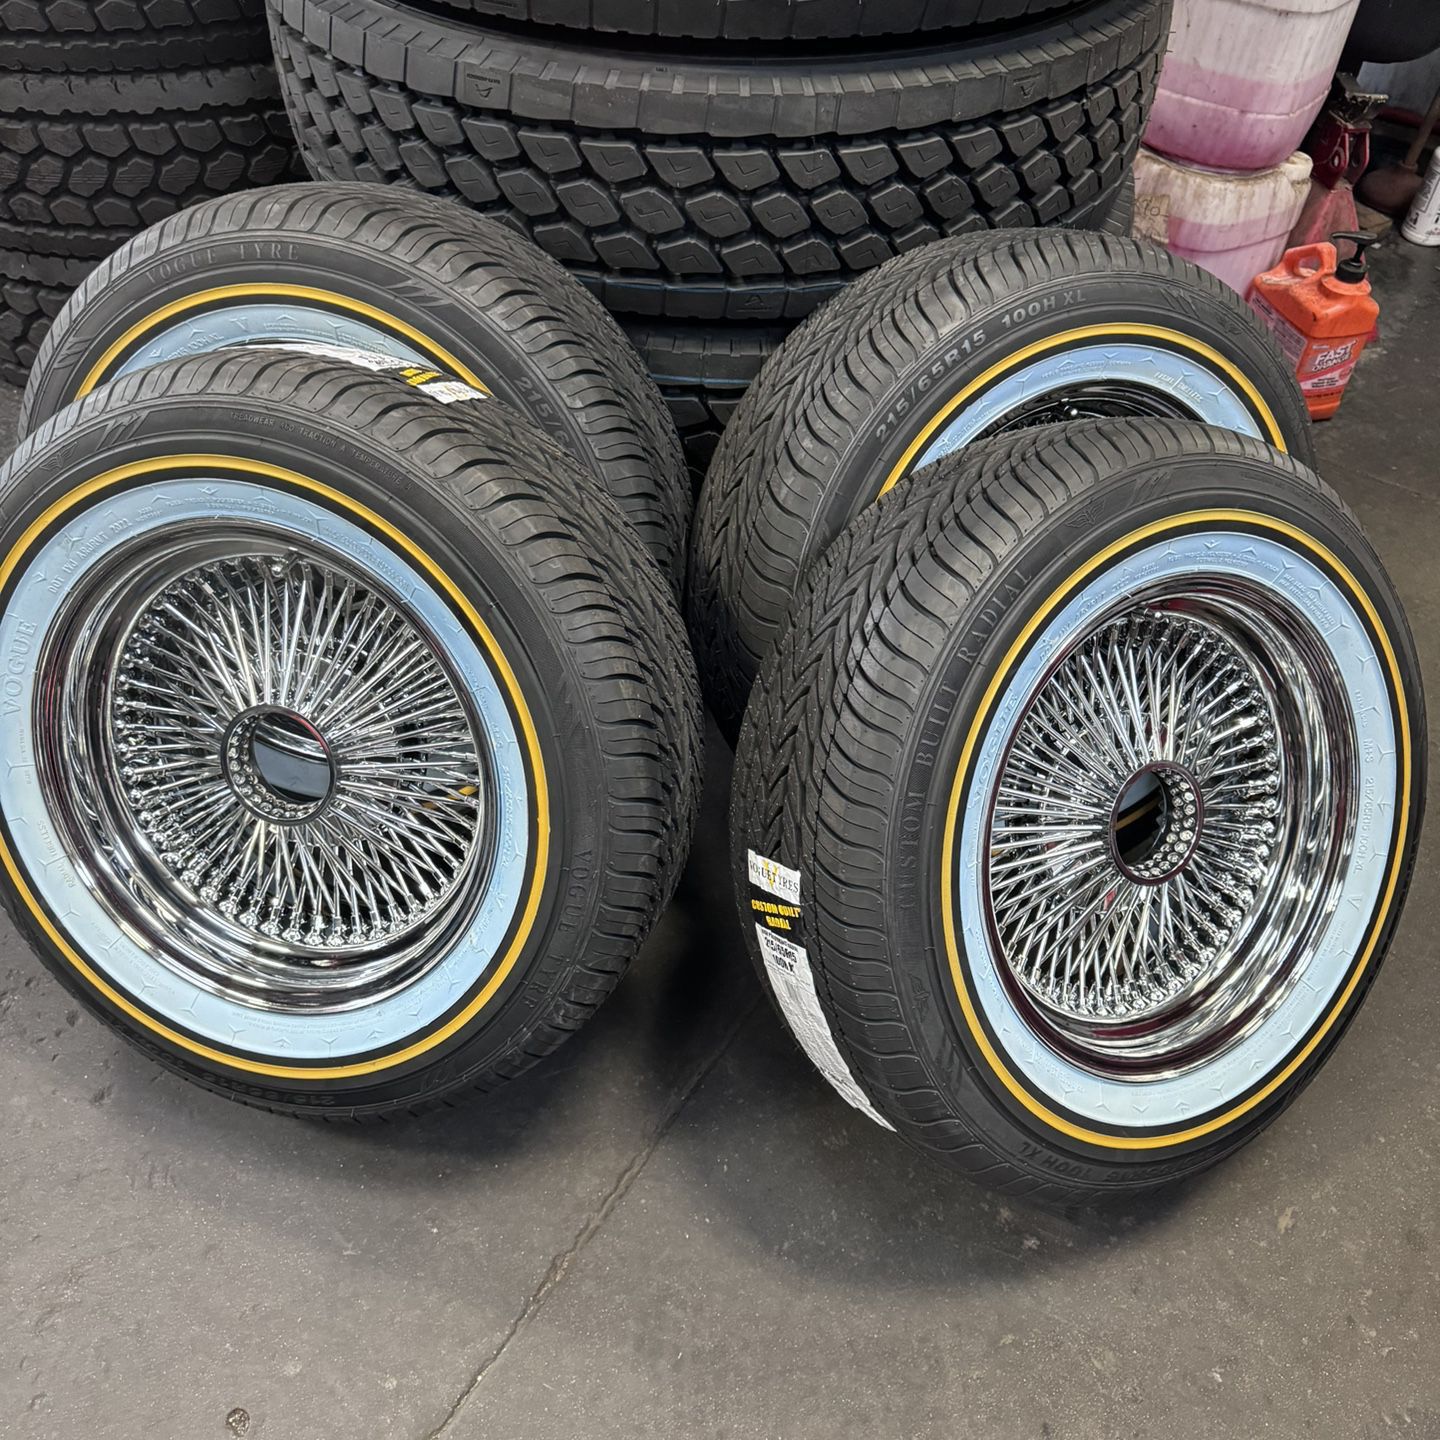 15X7” WIRE WHEELS WITH 215/65R15 VOGUE TIRES WITH INSTALLATION AND BALANCING 